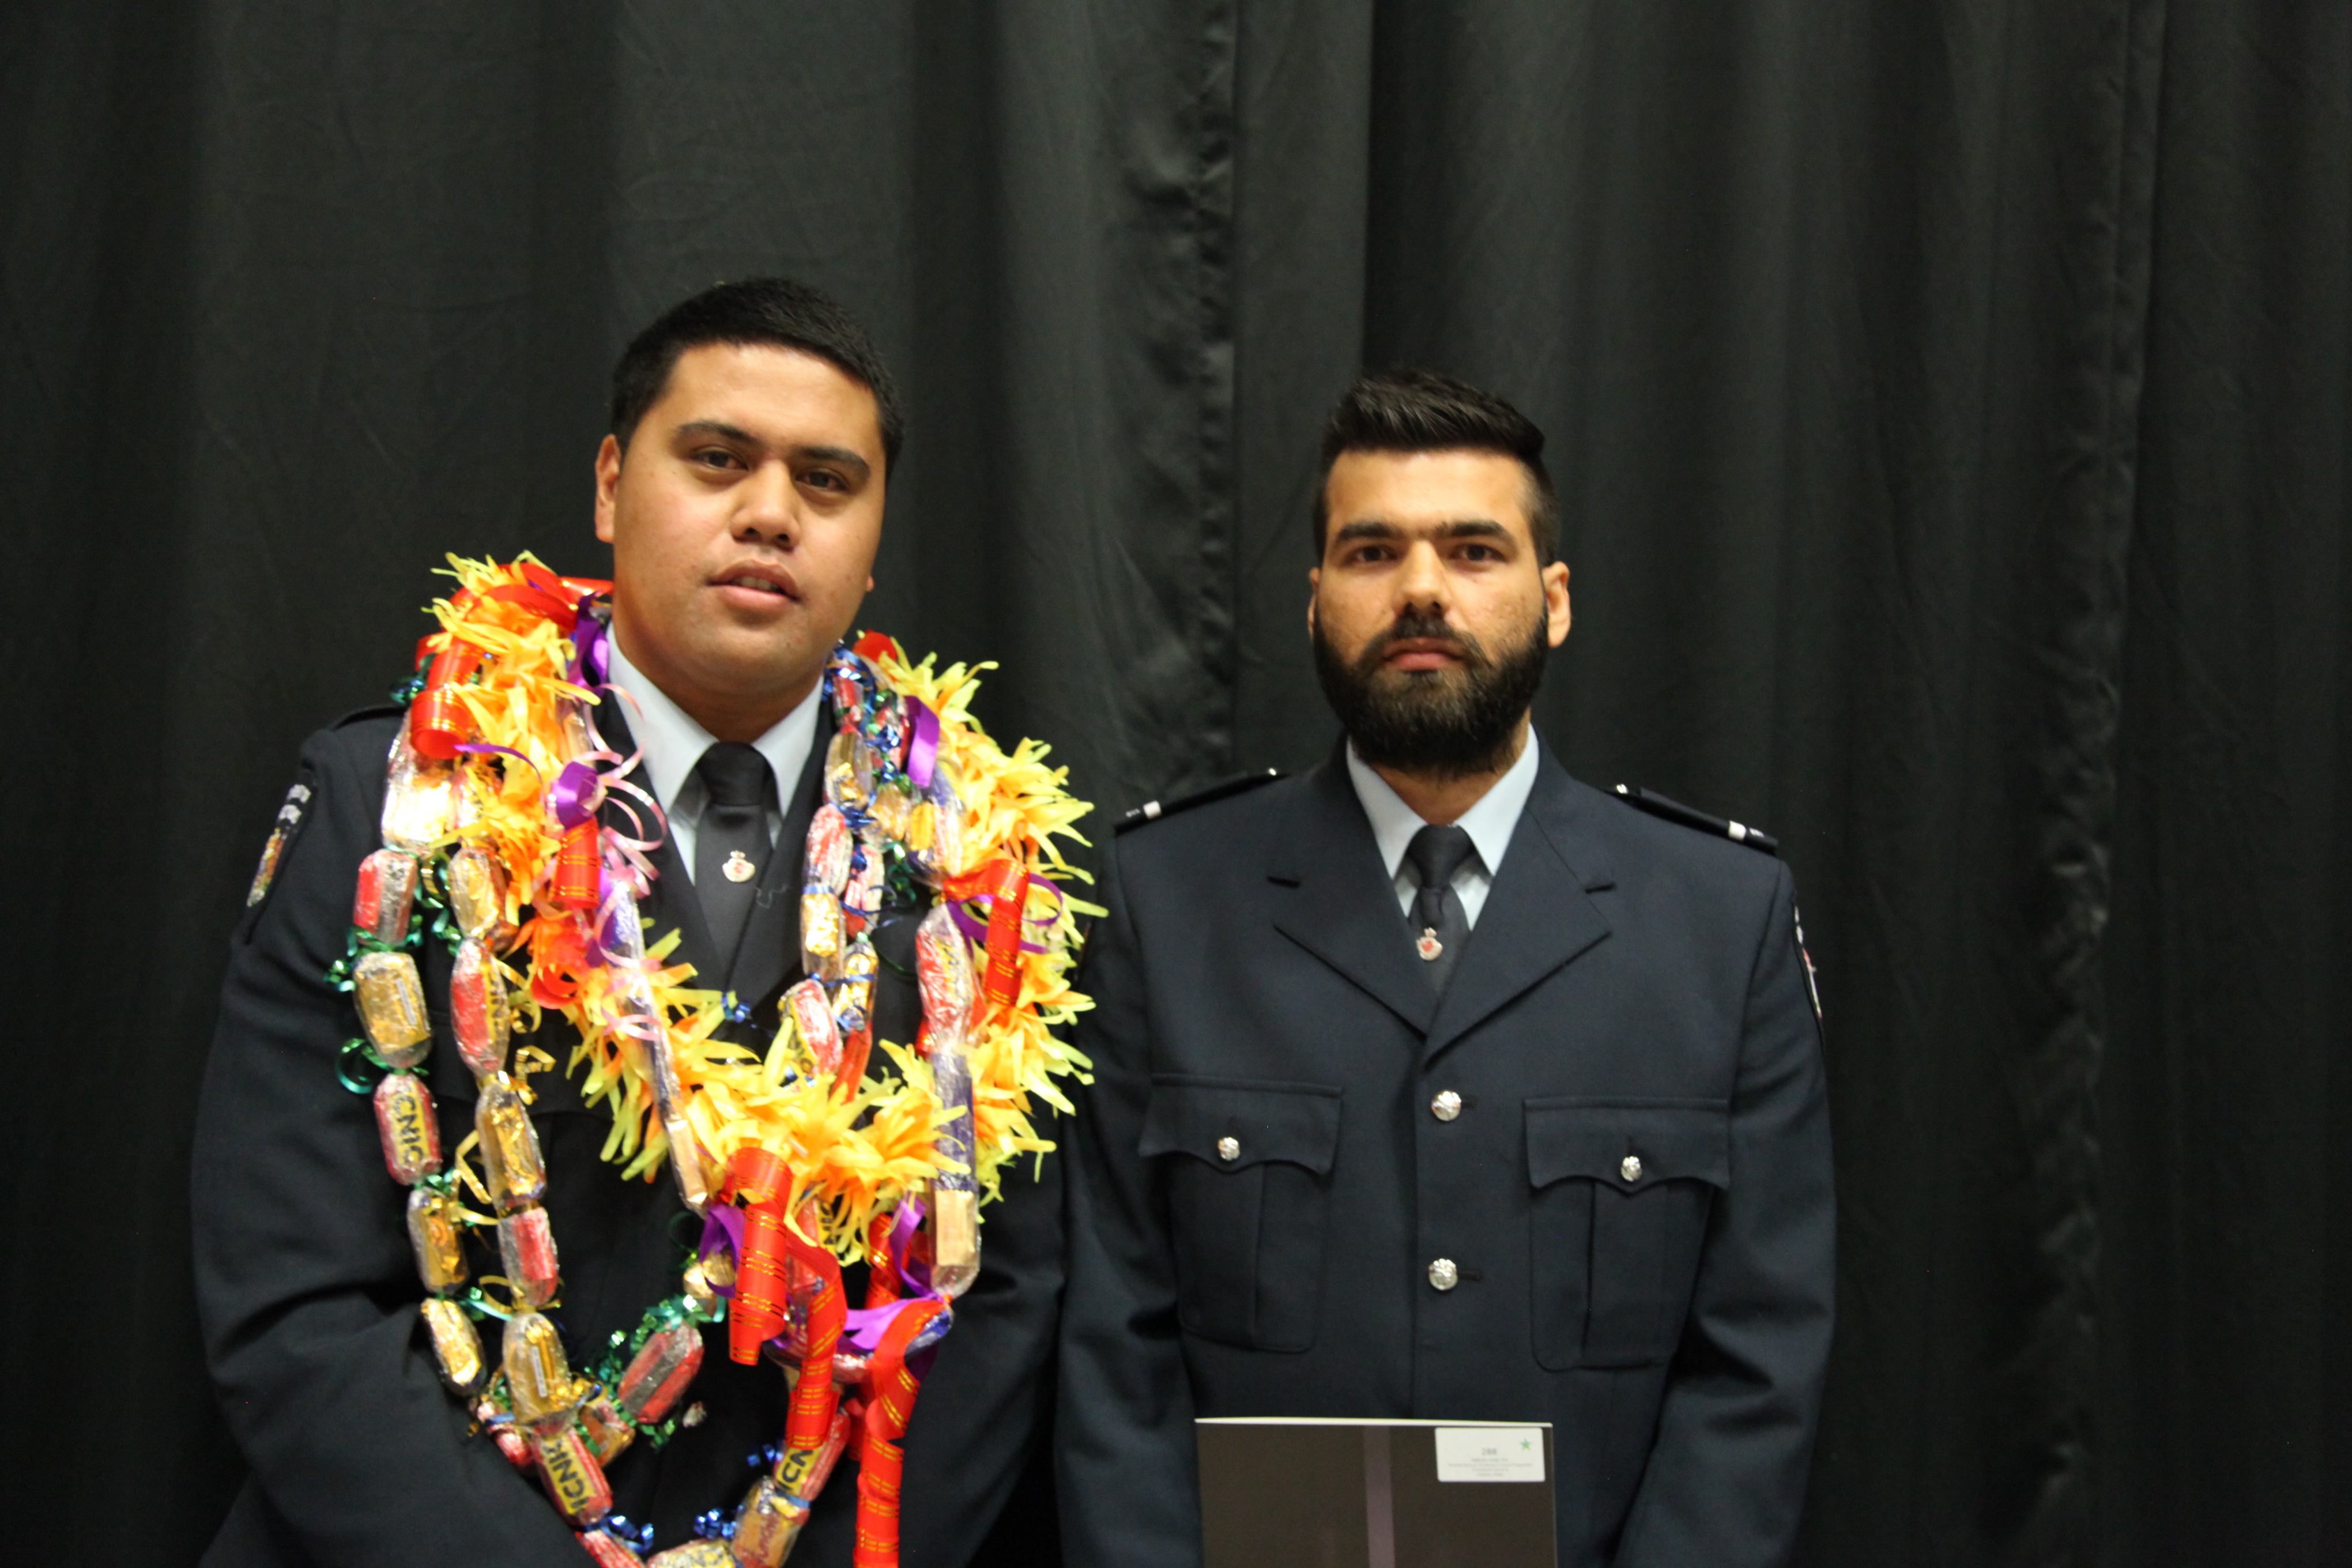 Corrections graduates readying themselves for a life behind the wire